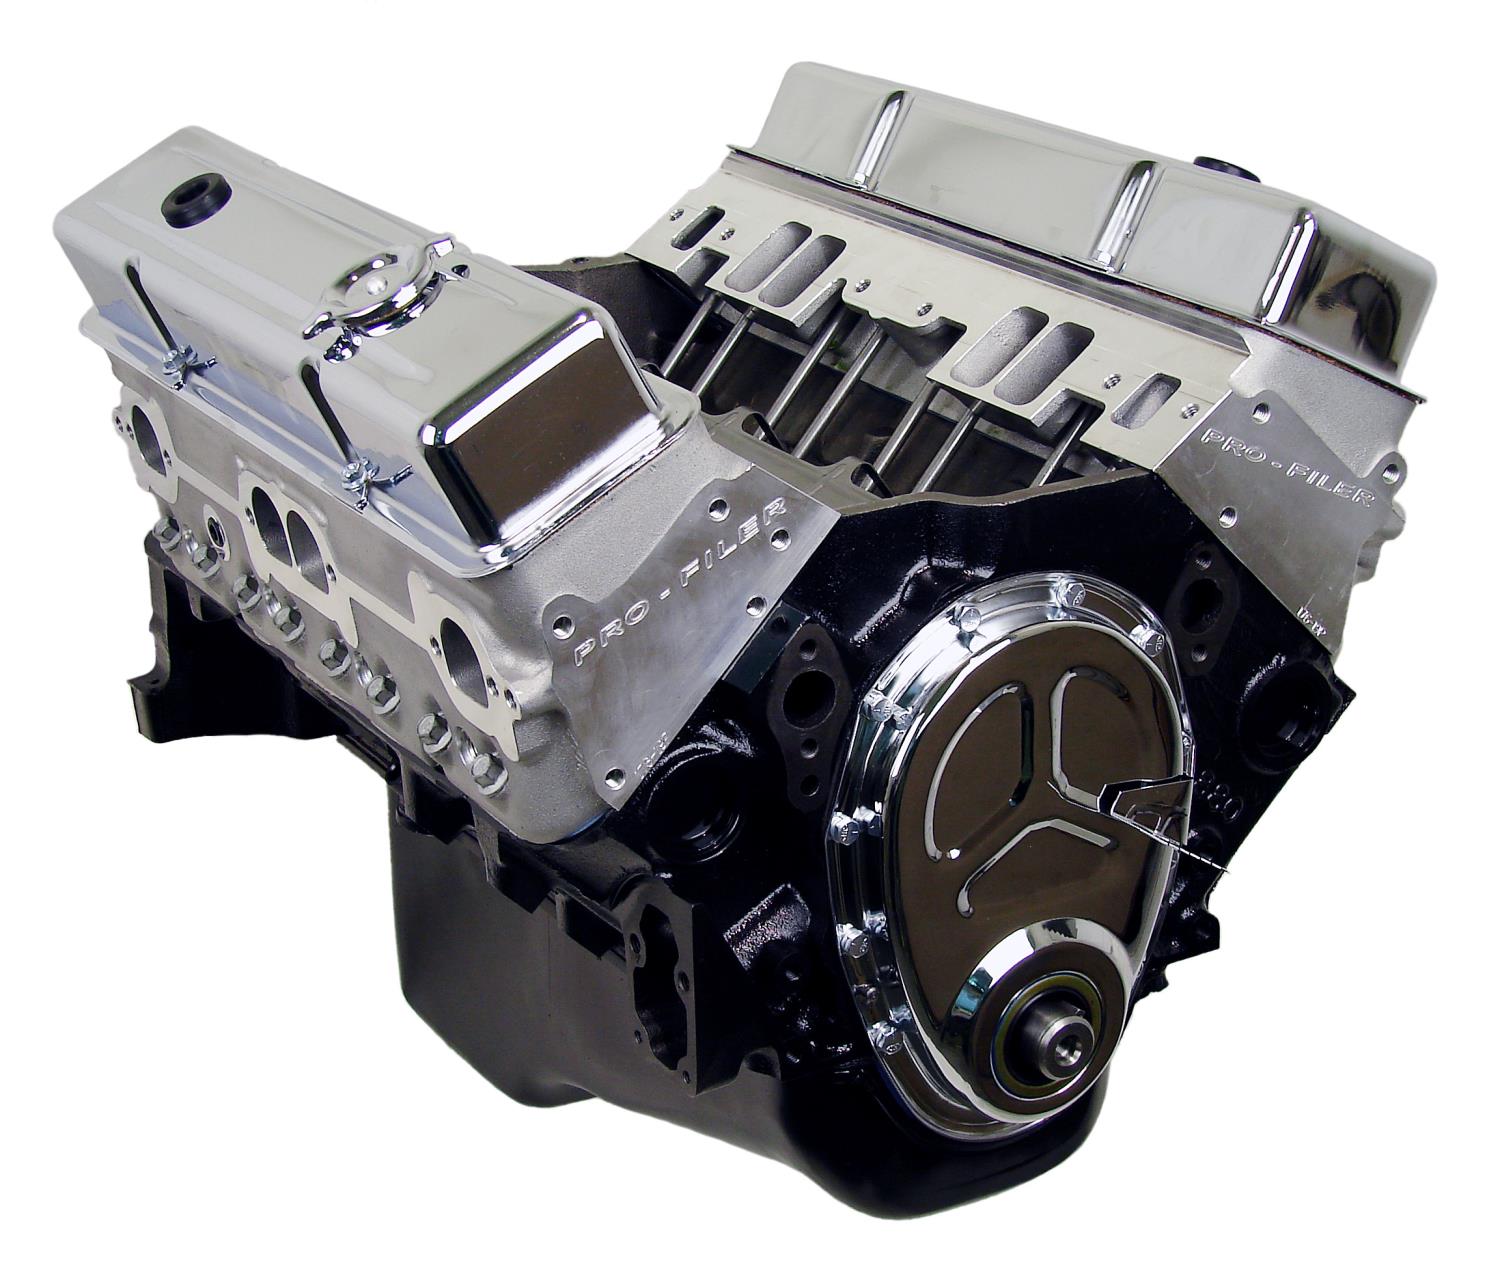 High Performance Crate Engine Small Block Chevy 383ci, 415 HP/460 ft.-lbs. TQ